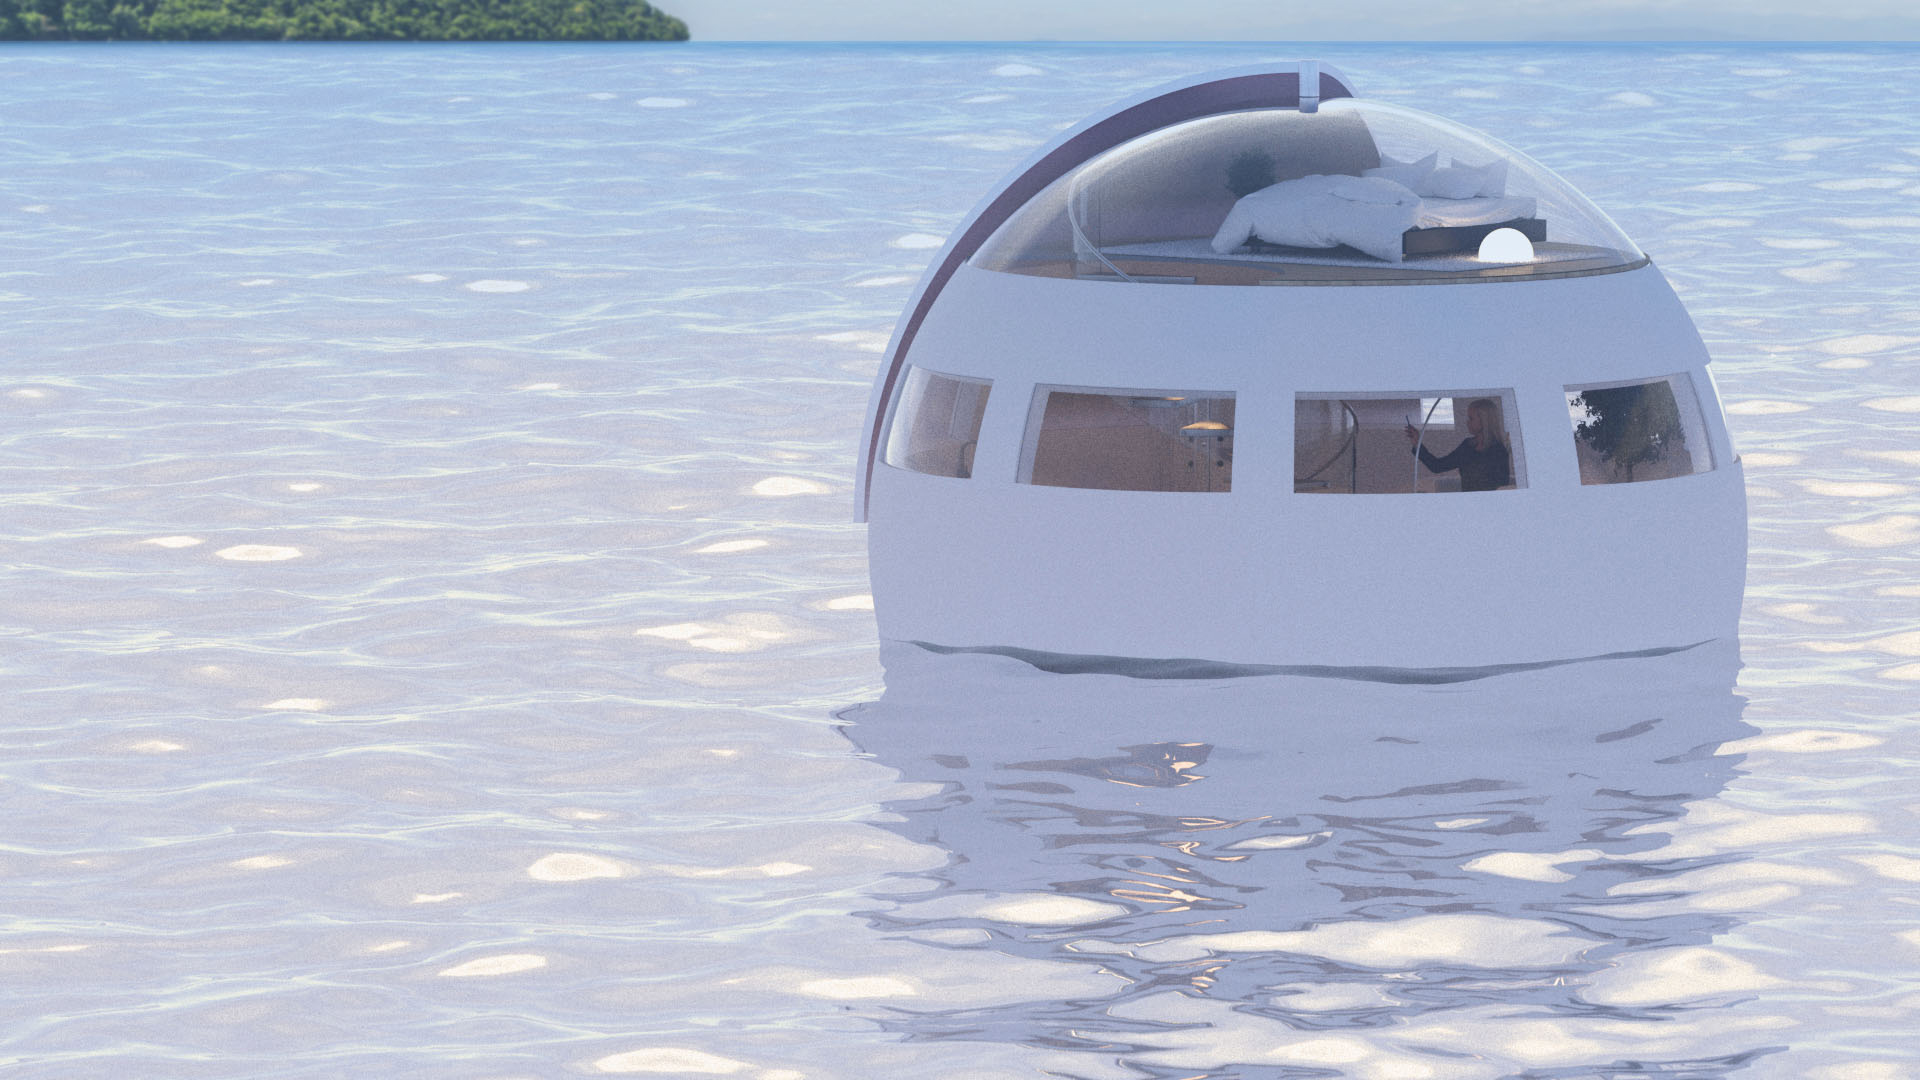 A capsule-shaped hotel room floats on water in a demonstration by the Huis Ten Bosch theme park in Nagasaki Prefecture. | HUIS TEN BOSCH CO. / VIA KYODO